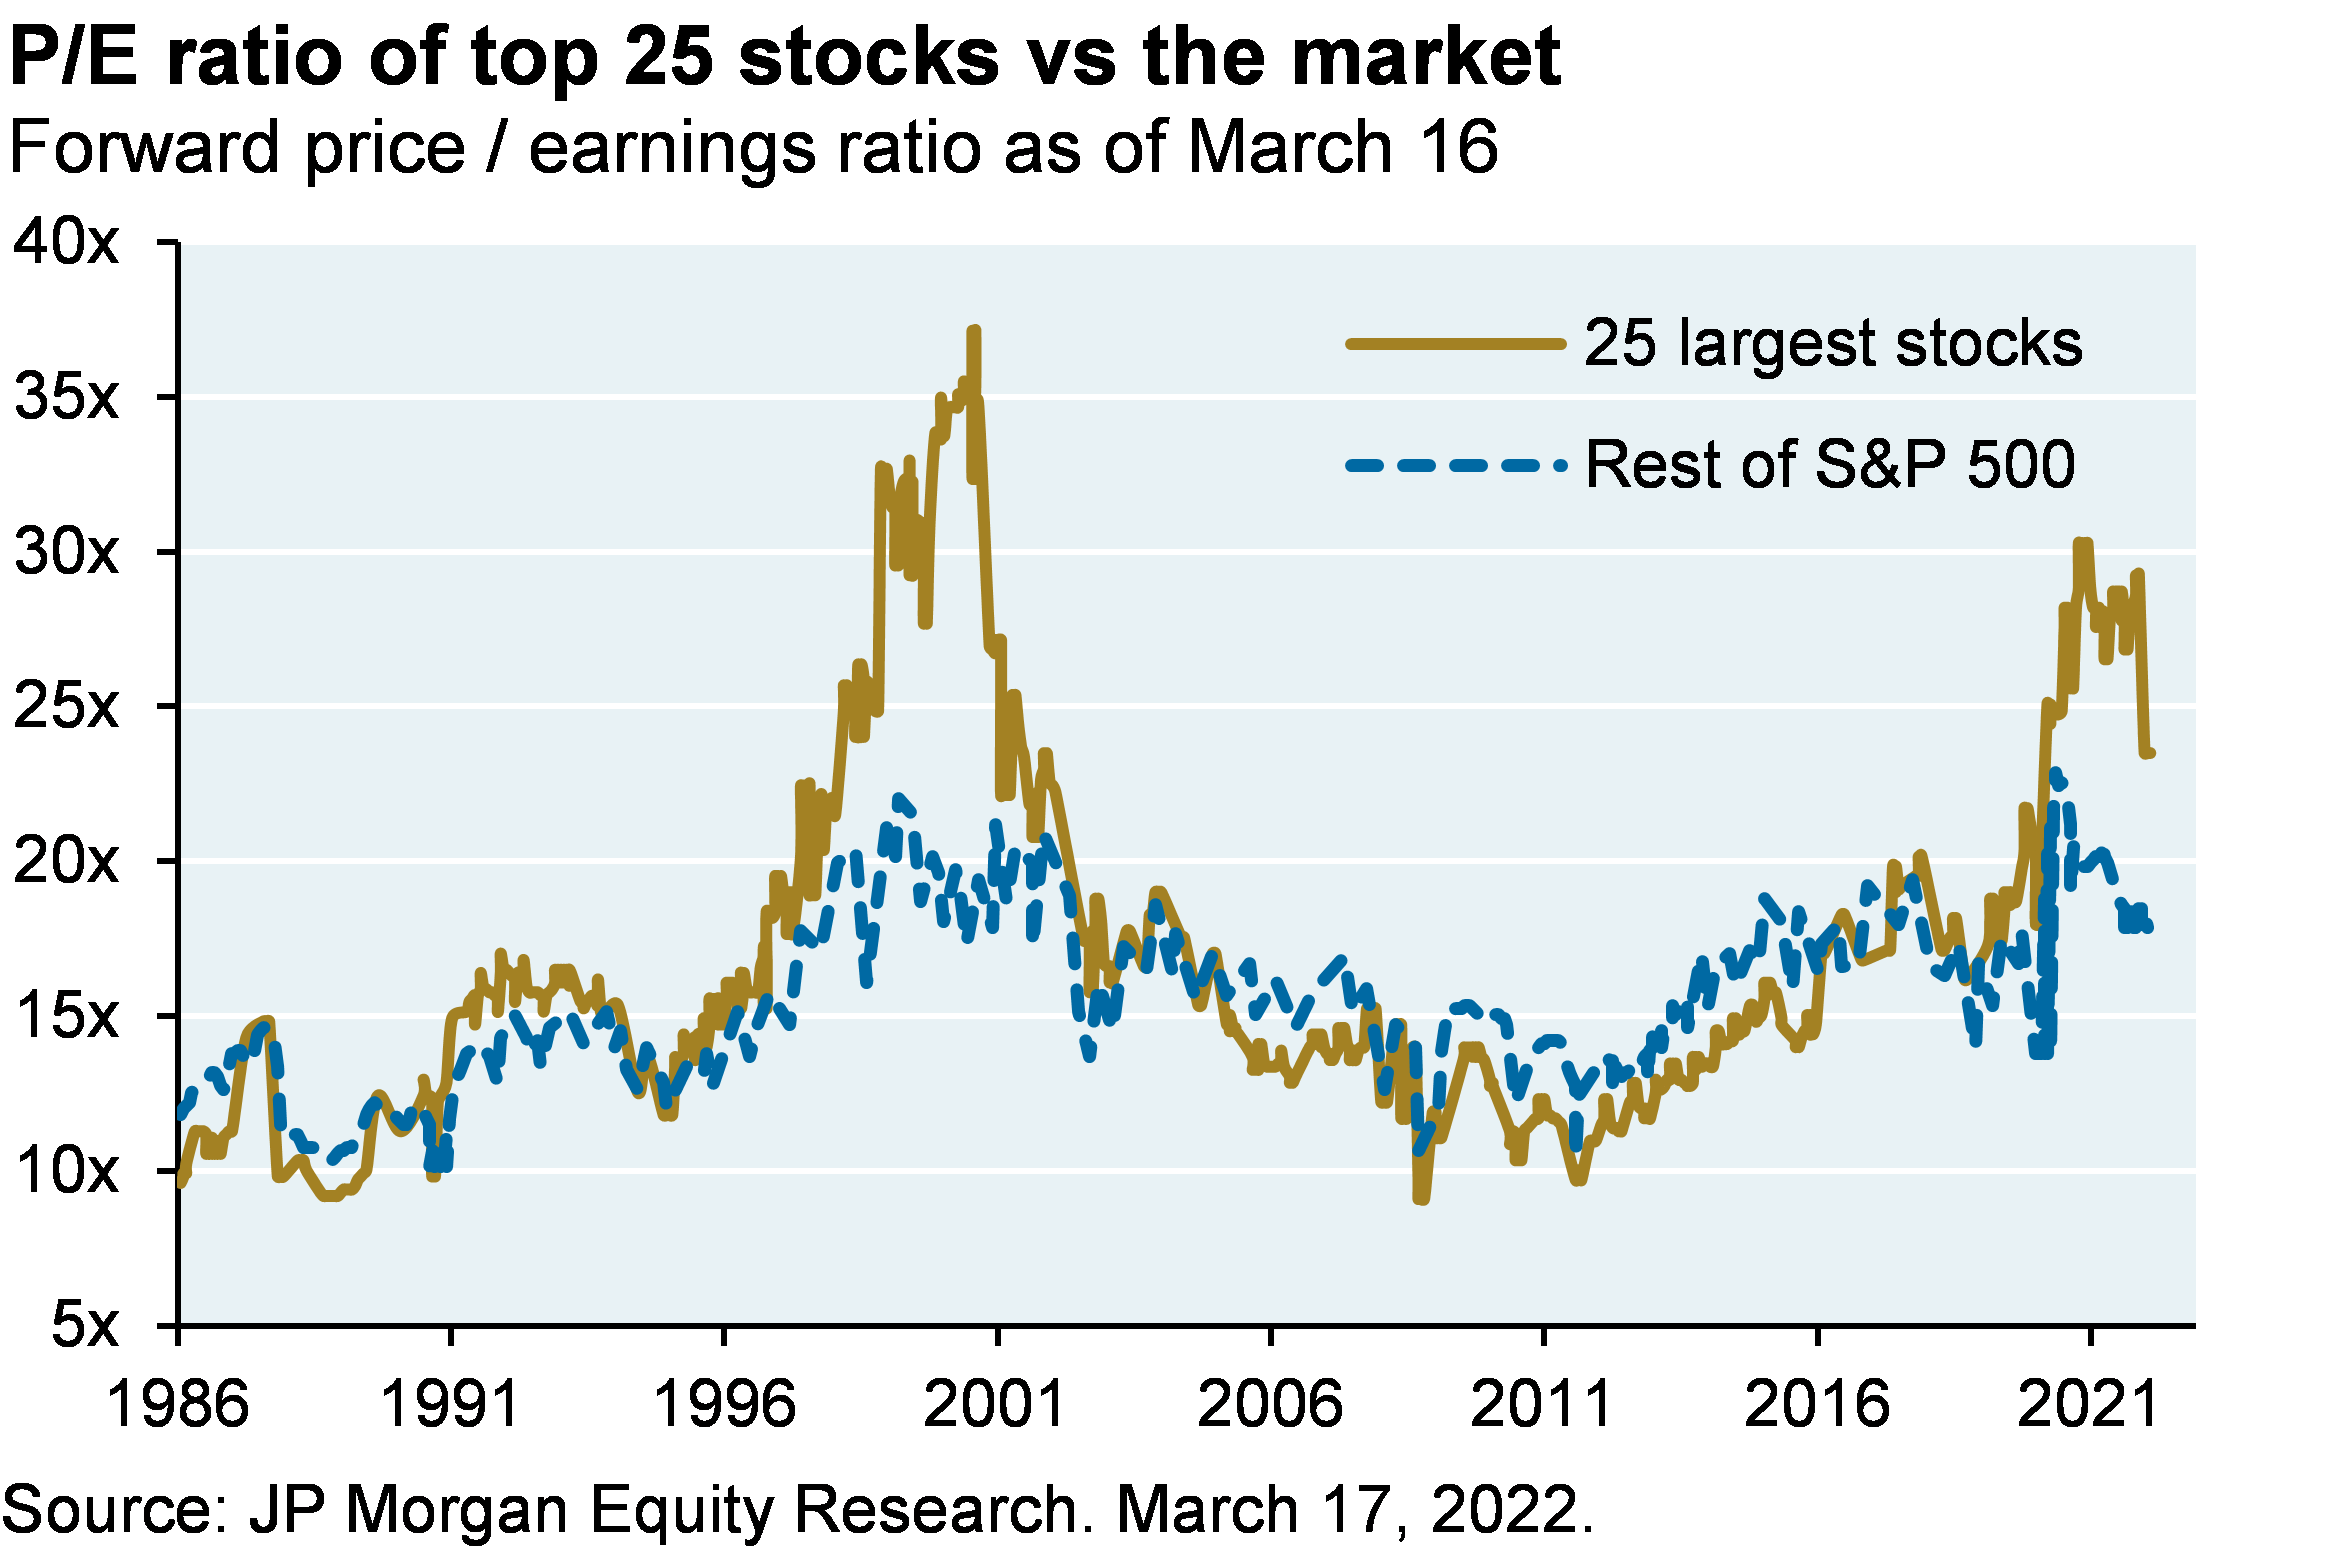 Line chart which plots the P/E ratio of the top 25 stocks in the S&P 500 versus the rest of the market. The chart shows that the largest companies have elevated relative valuations compared to history. 